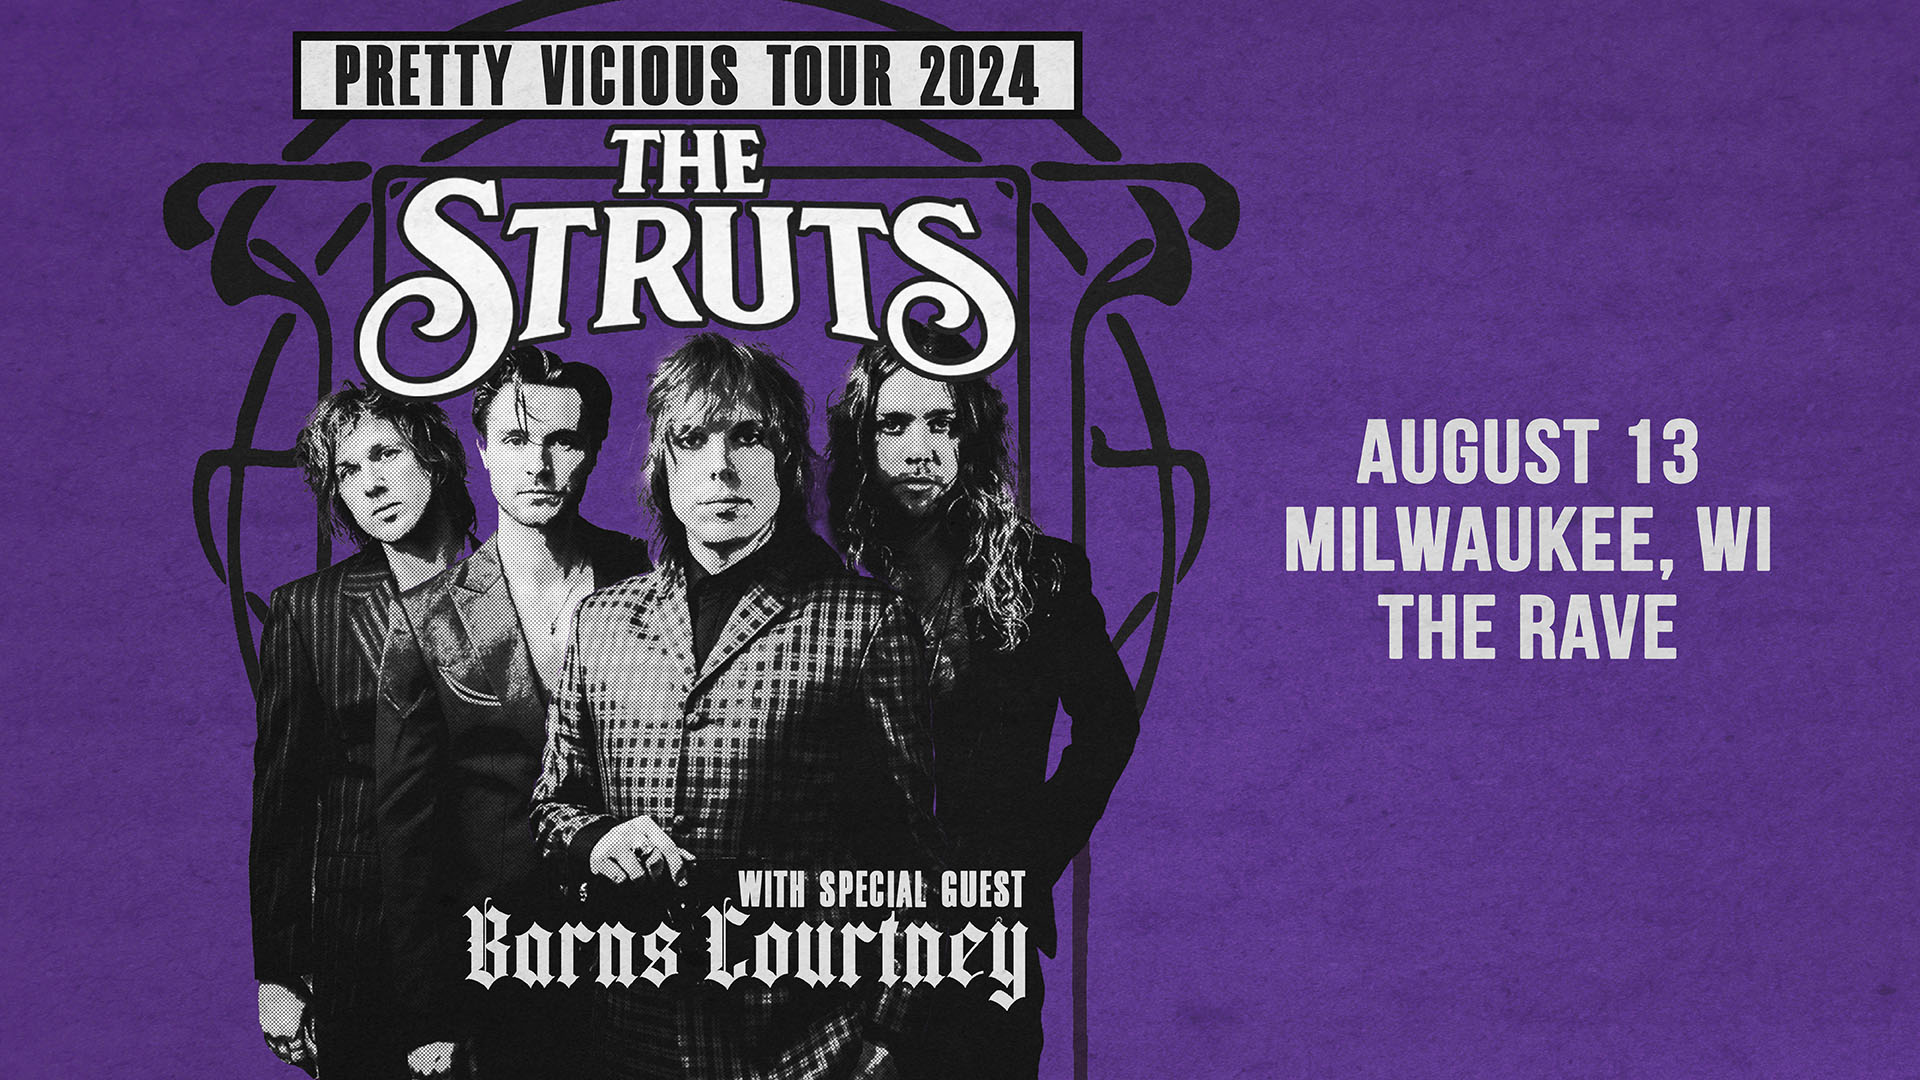 96.9 The Fox Welcomes The Struts